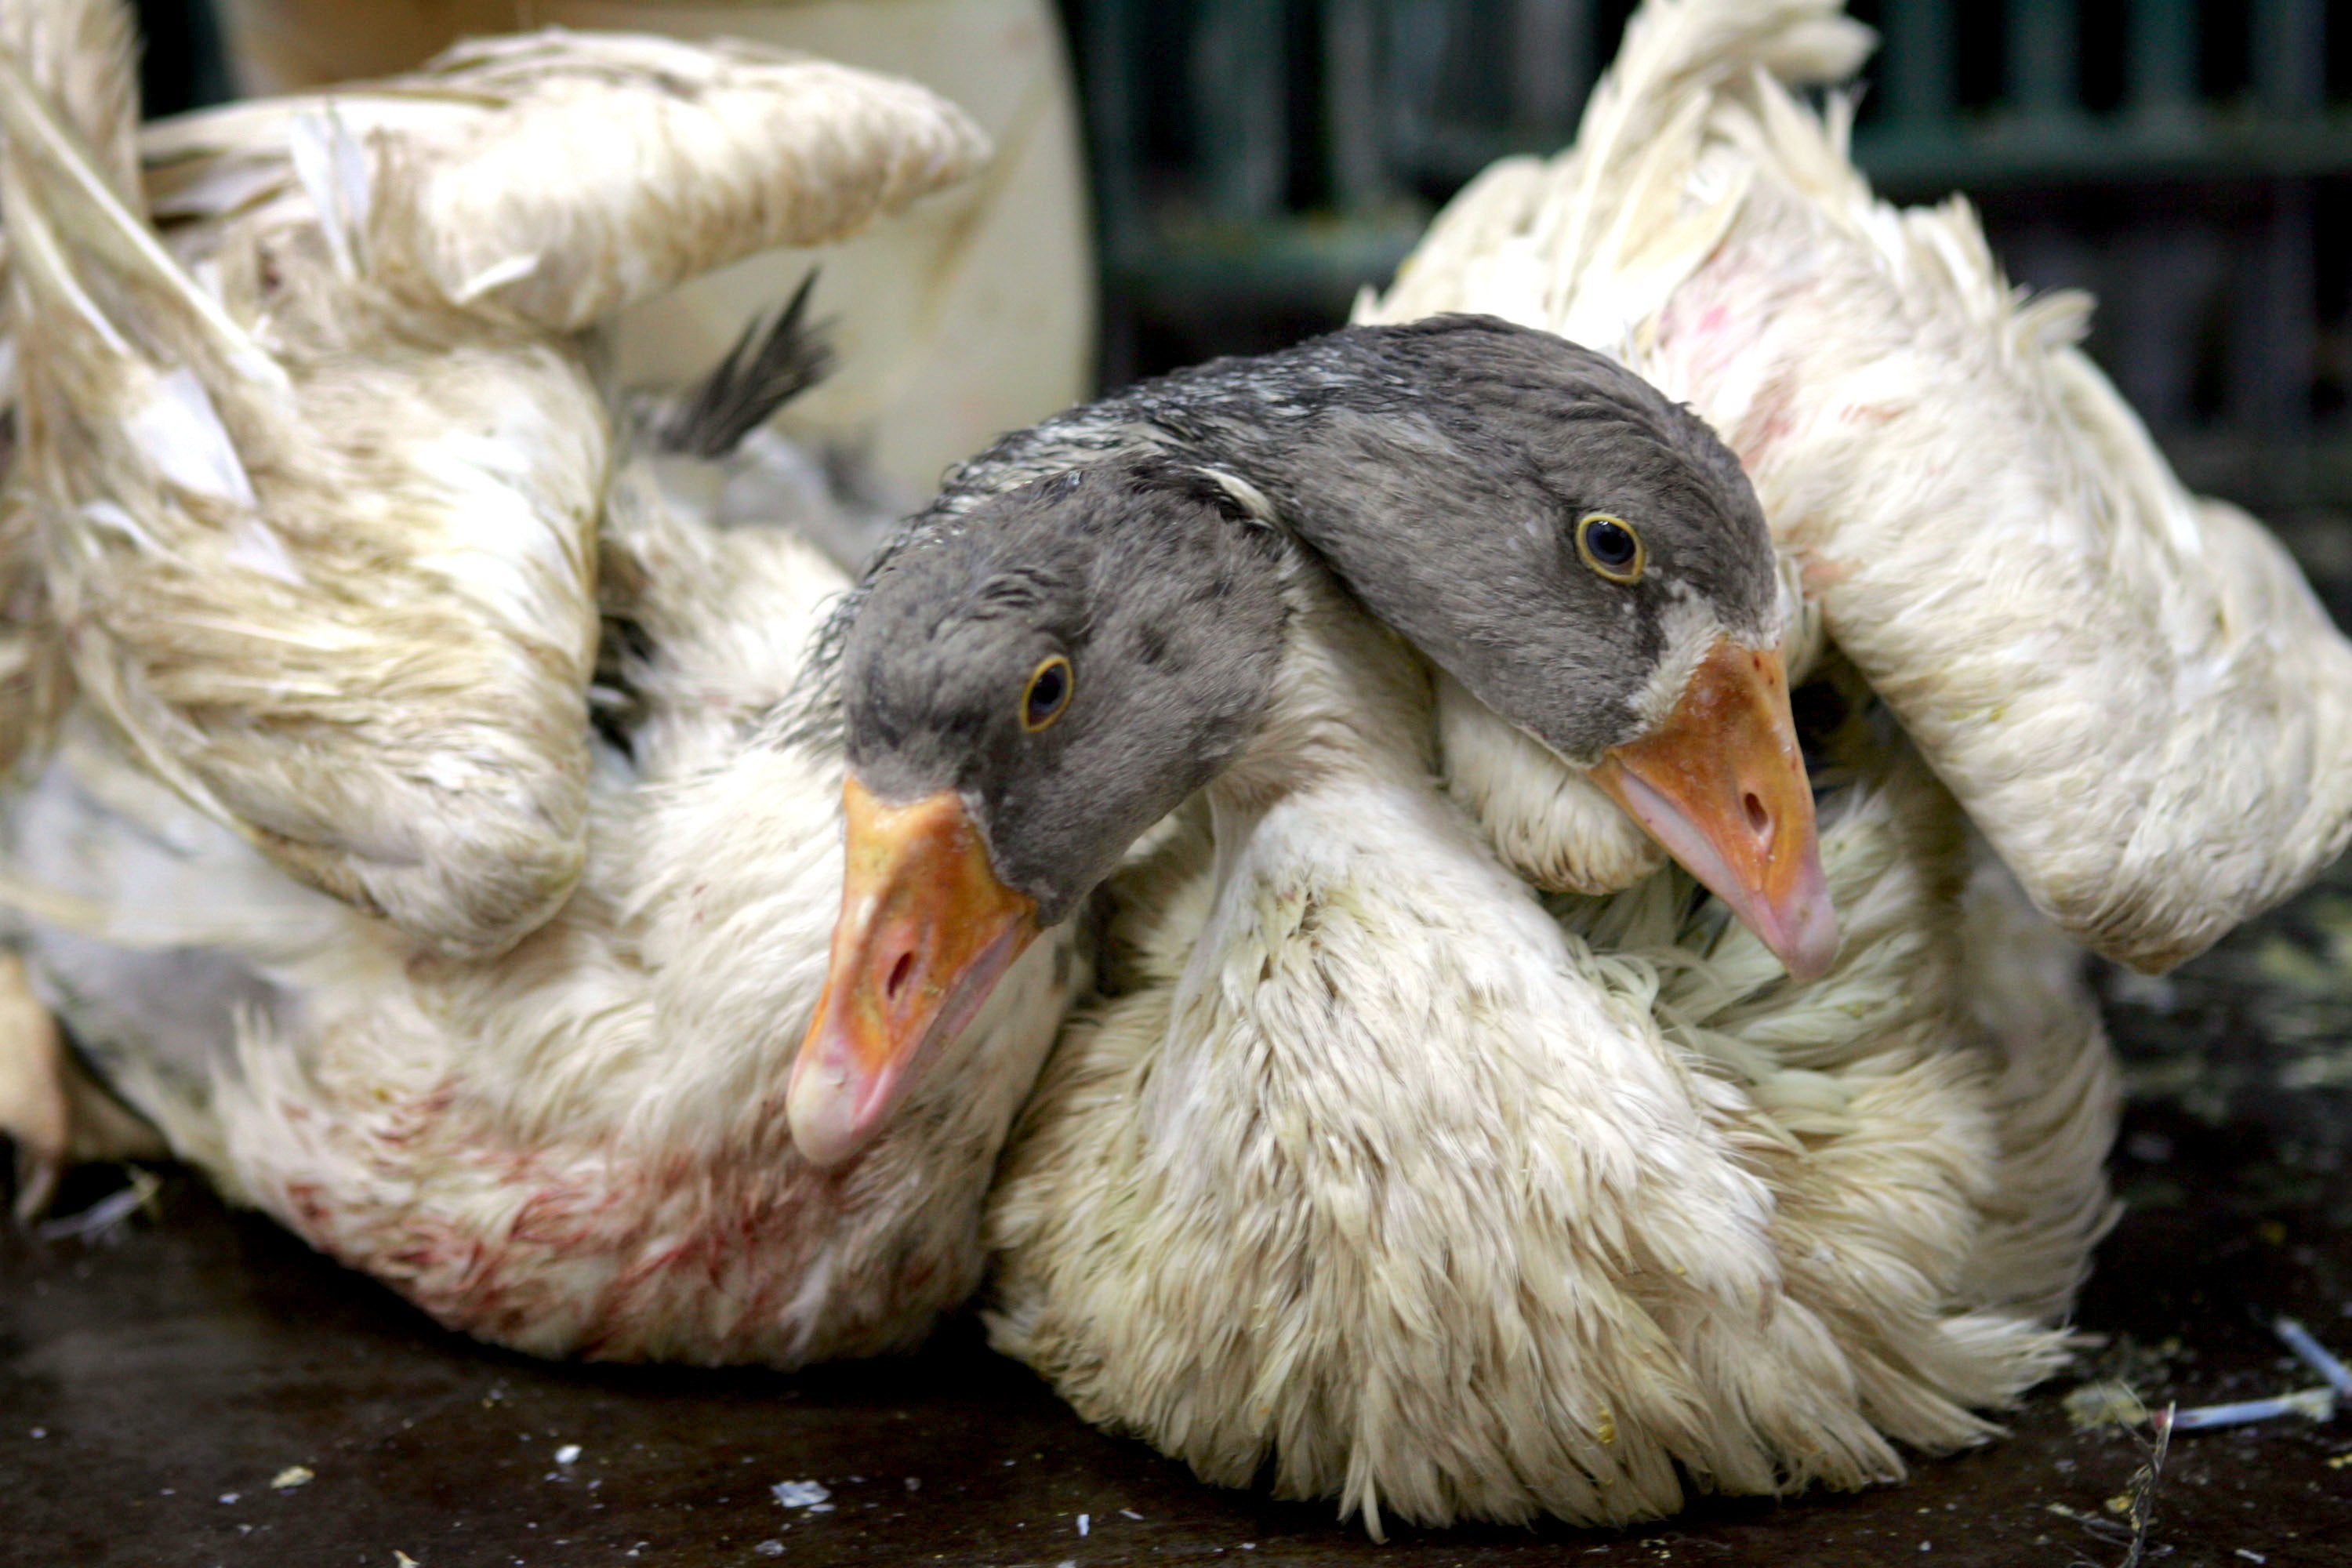 Foie gras is an undeniably cruel product, so much so that its production has been banned in the UK for more than two decades